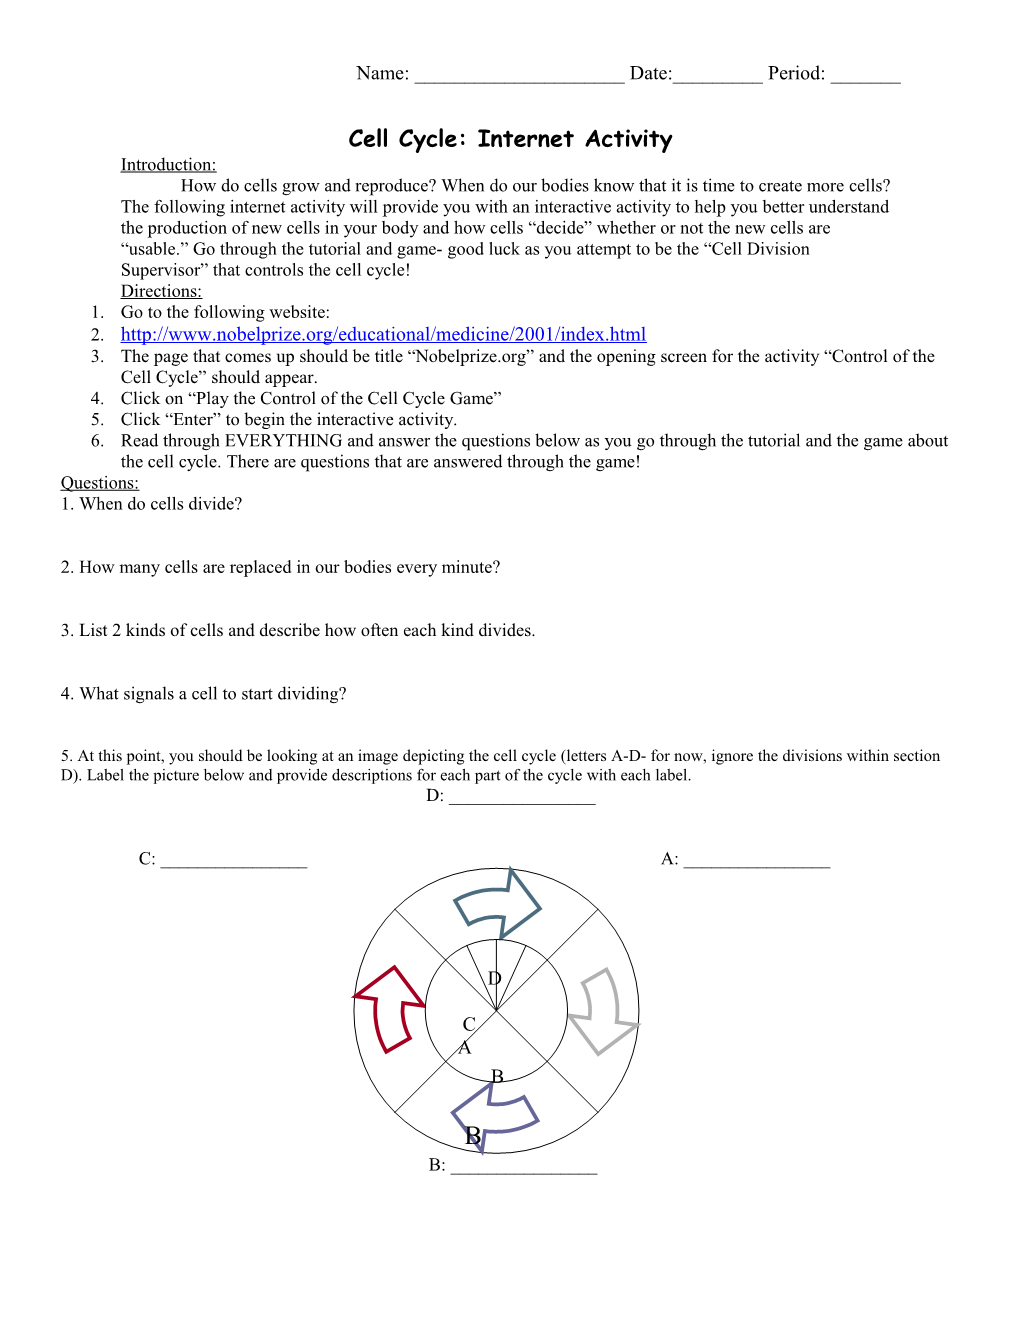 Cell Cycle: Internet Activity